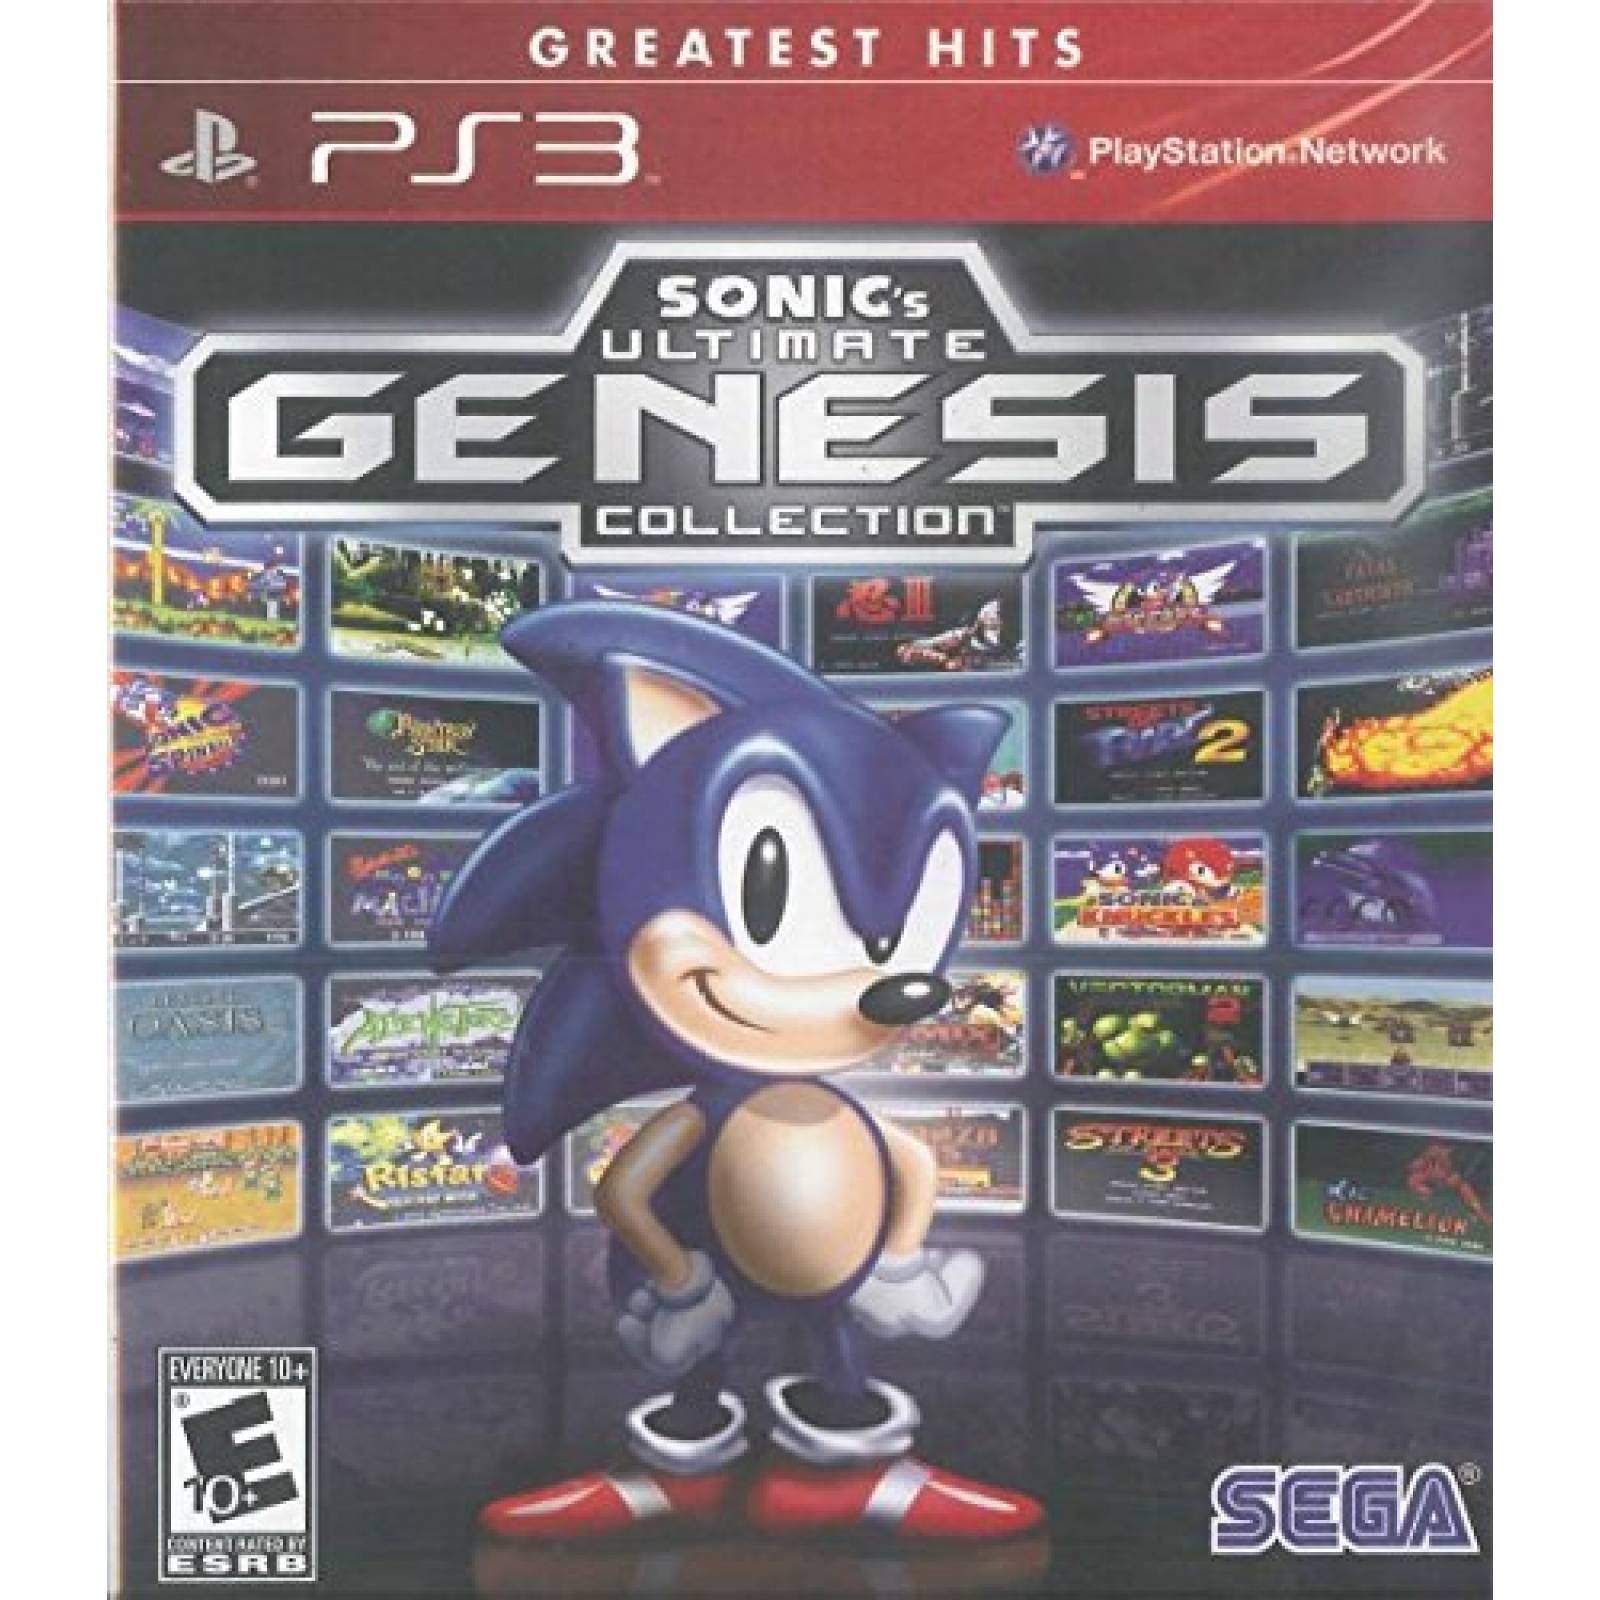 Sonic Ultimate Genesis Collection 